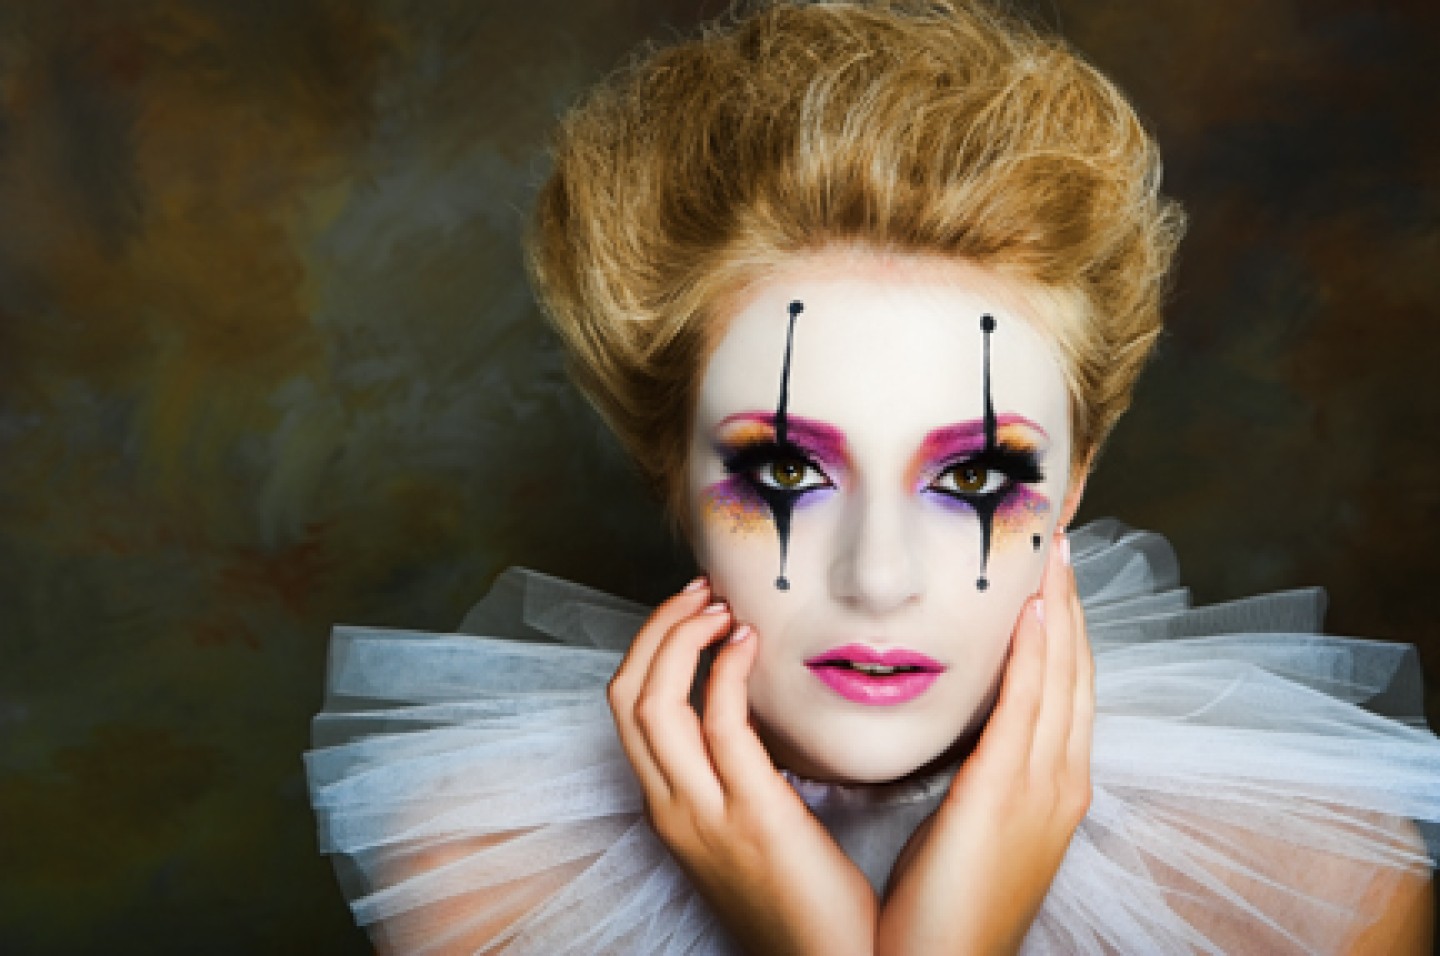 Harlequin makeup by Tina Brocklebank Make-up artist, photography by Conway-Smith photography.